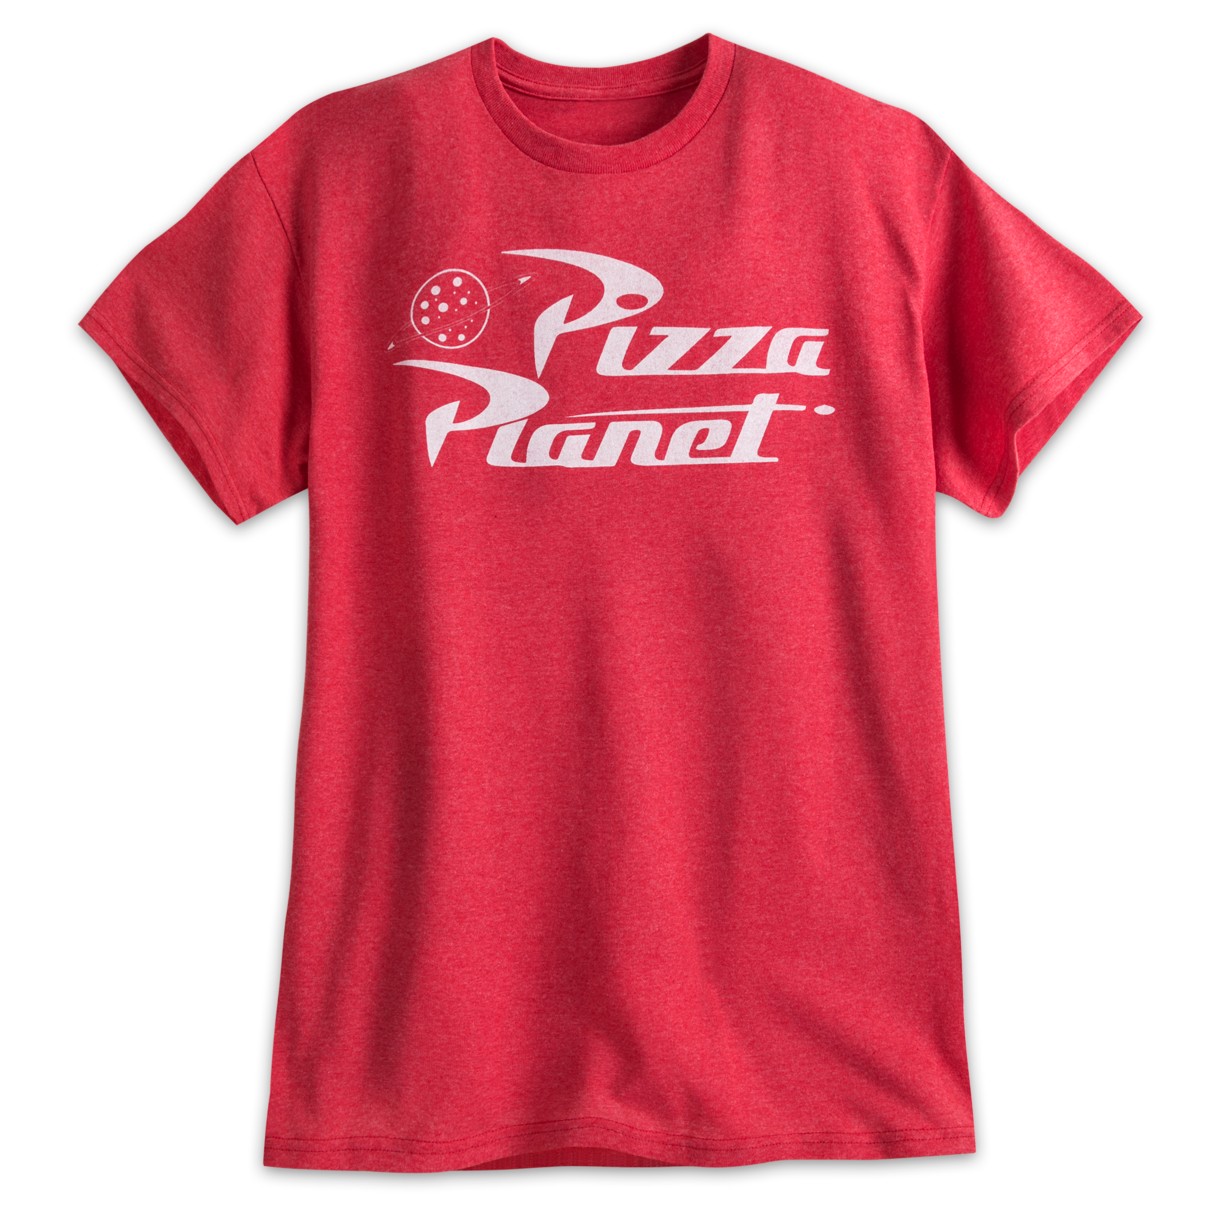 Pizza Planet Logo Tee for Men – Toy Story